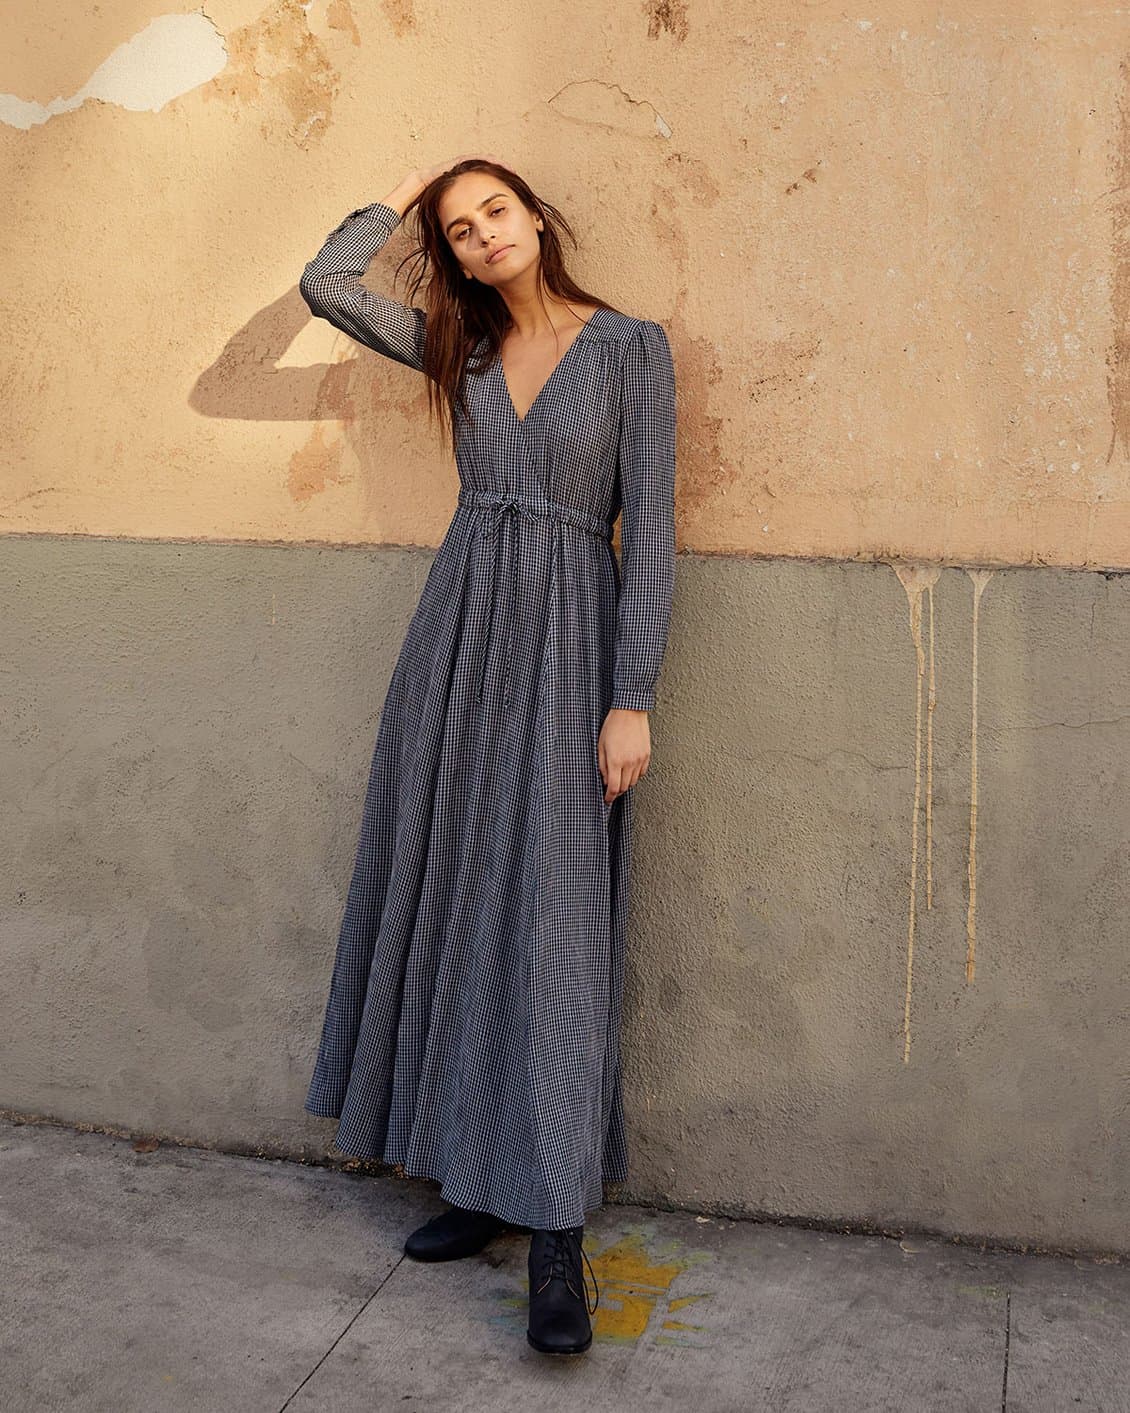 ethical American fashion brands